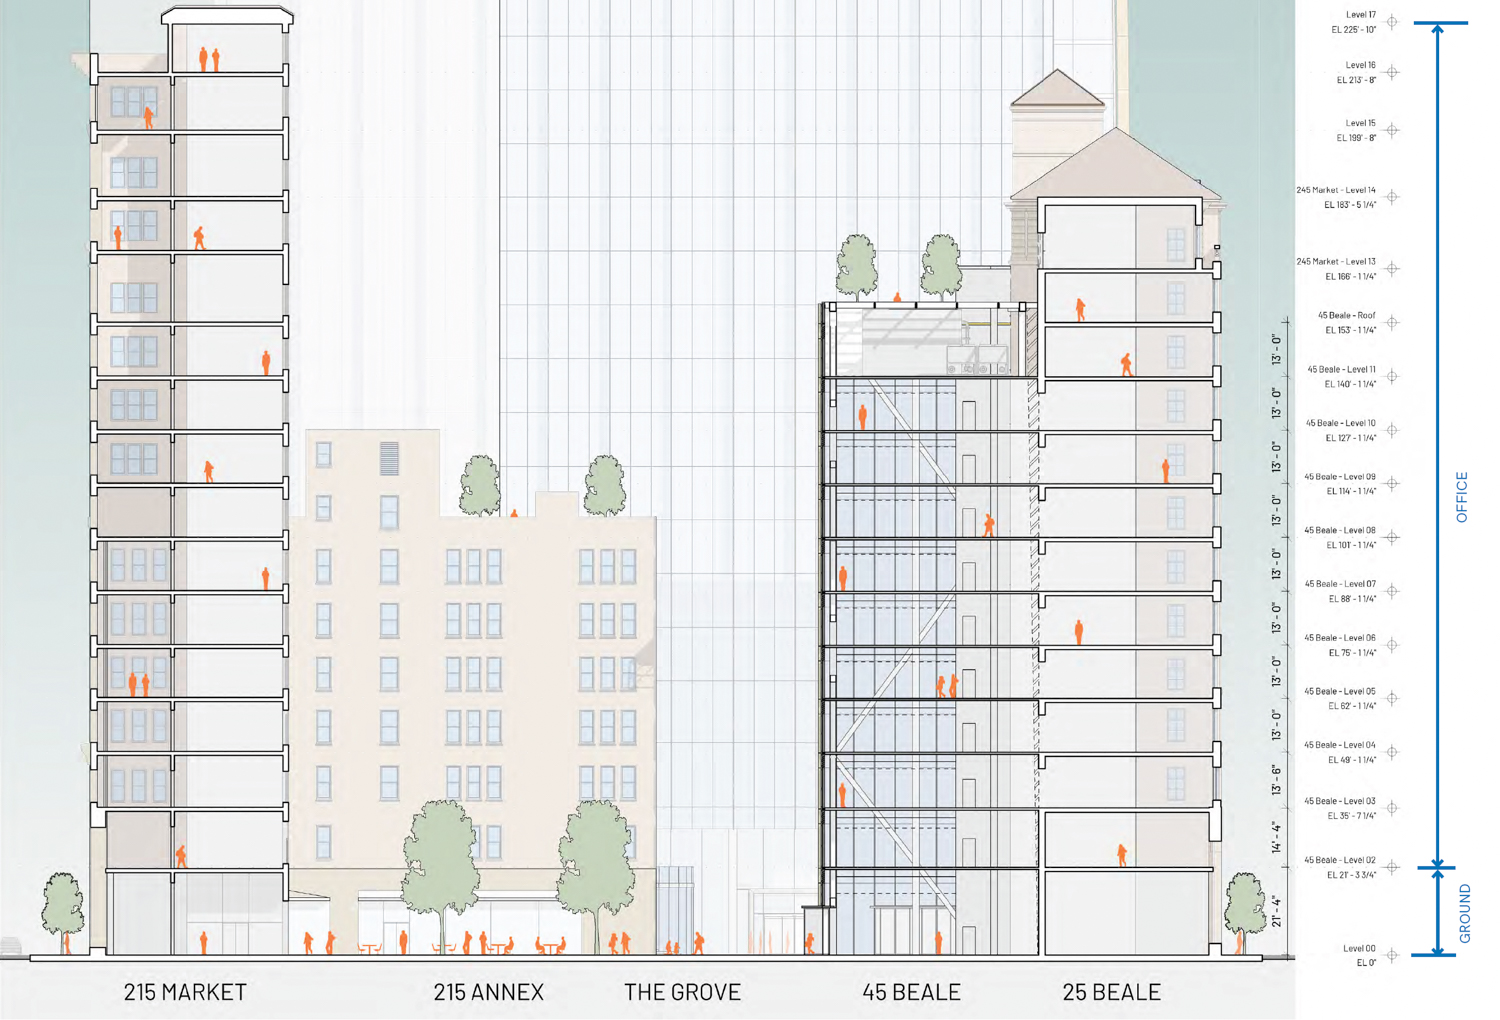 200 Mission Street Campus elevation of 215-245 Market Street, rendering by Pickard Chilton